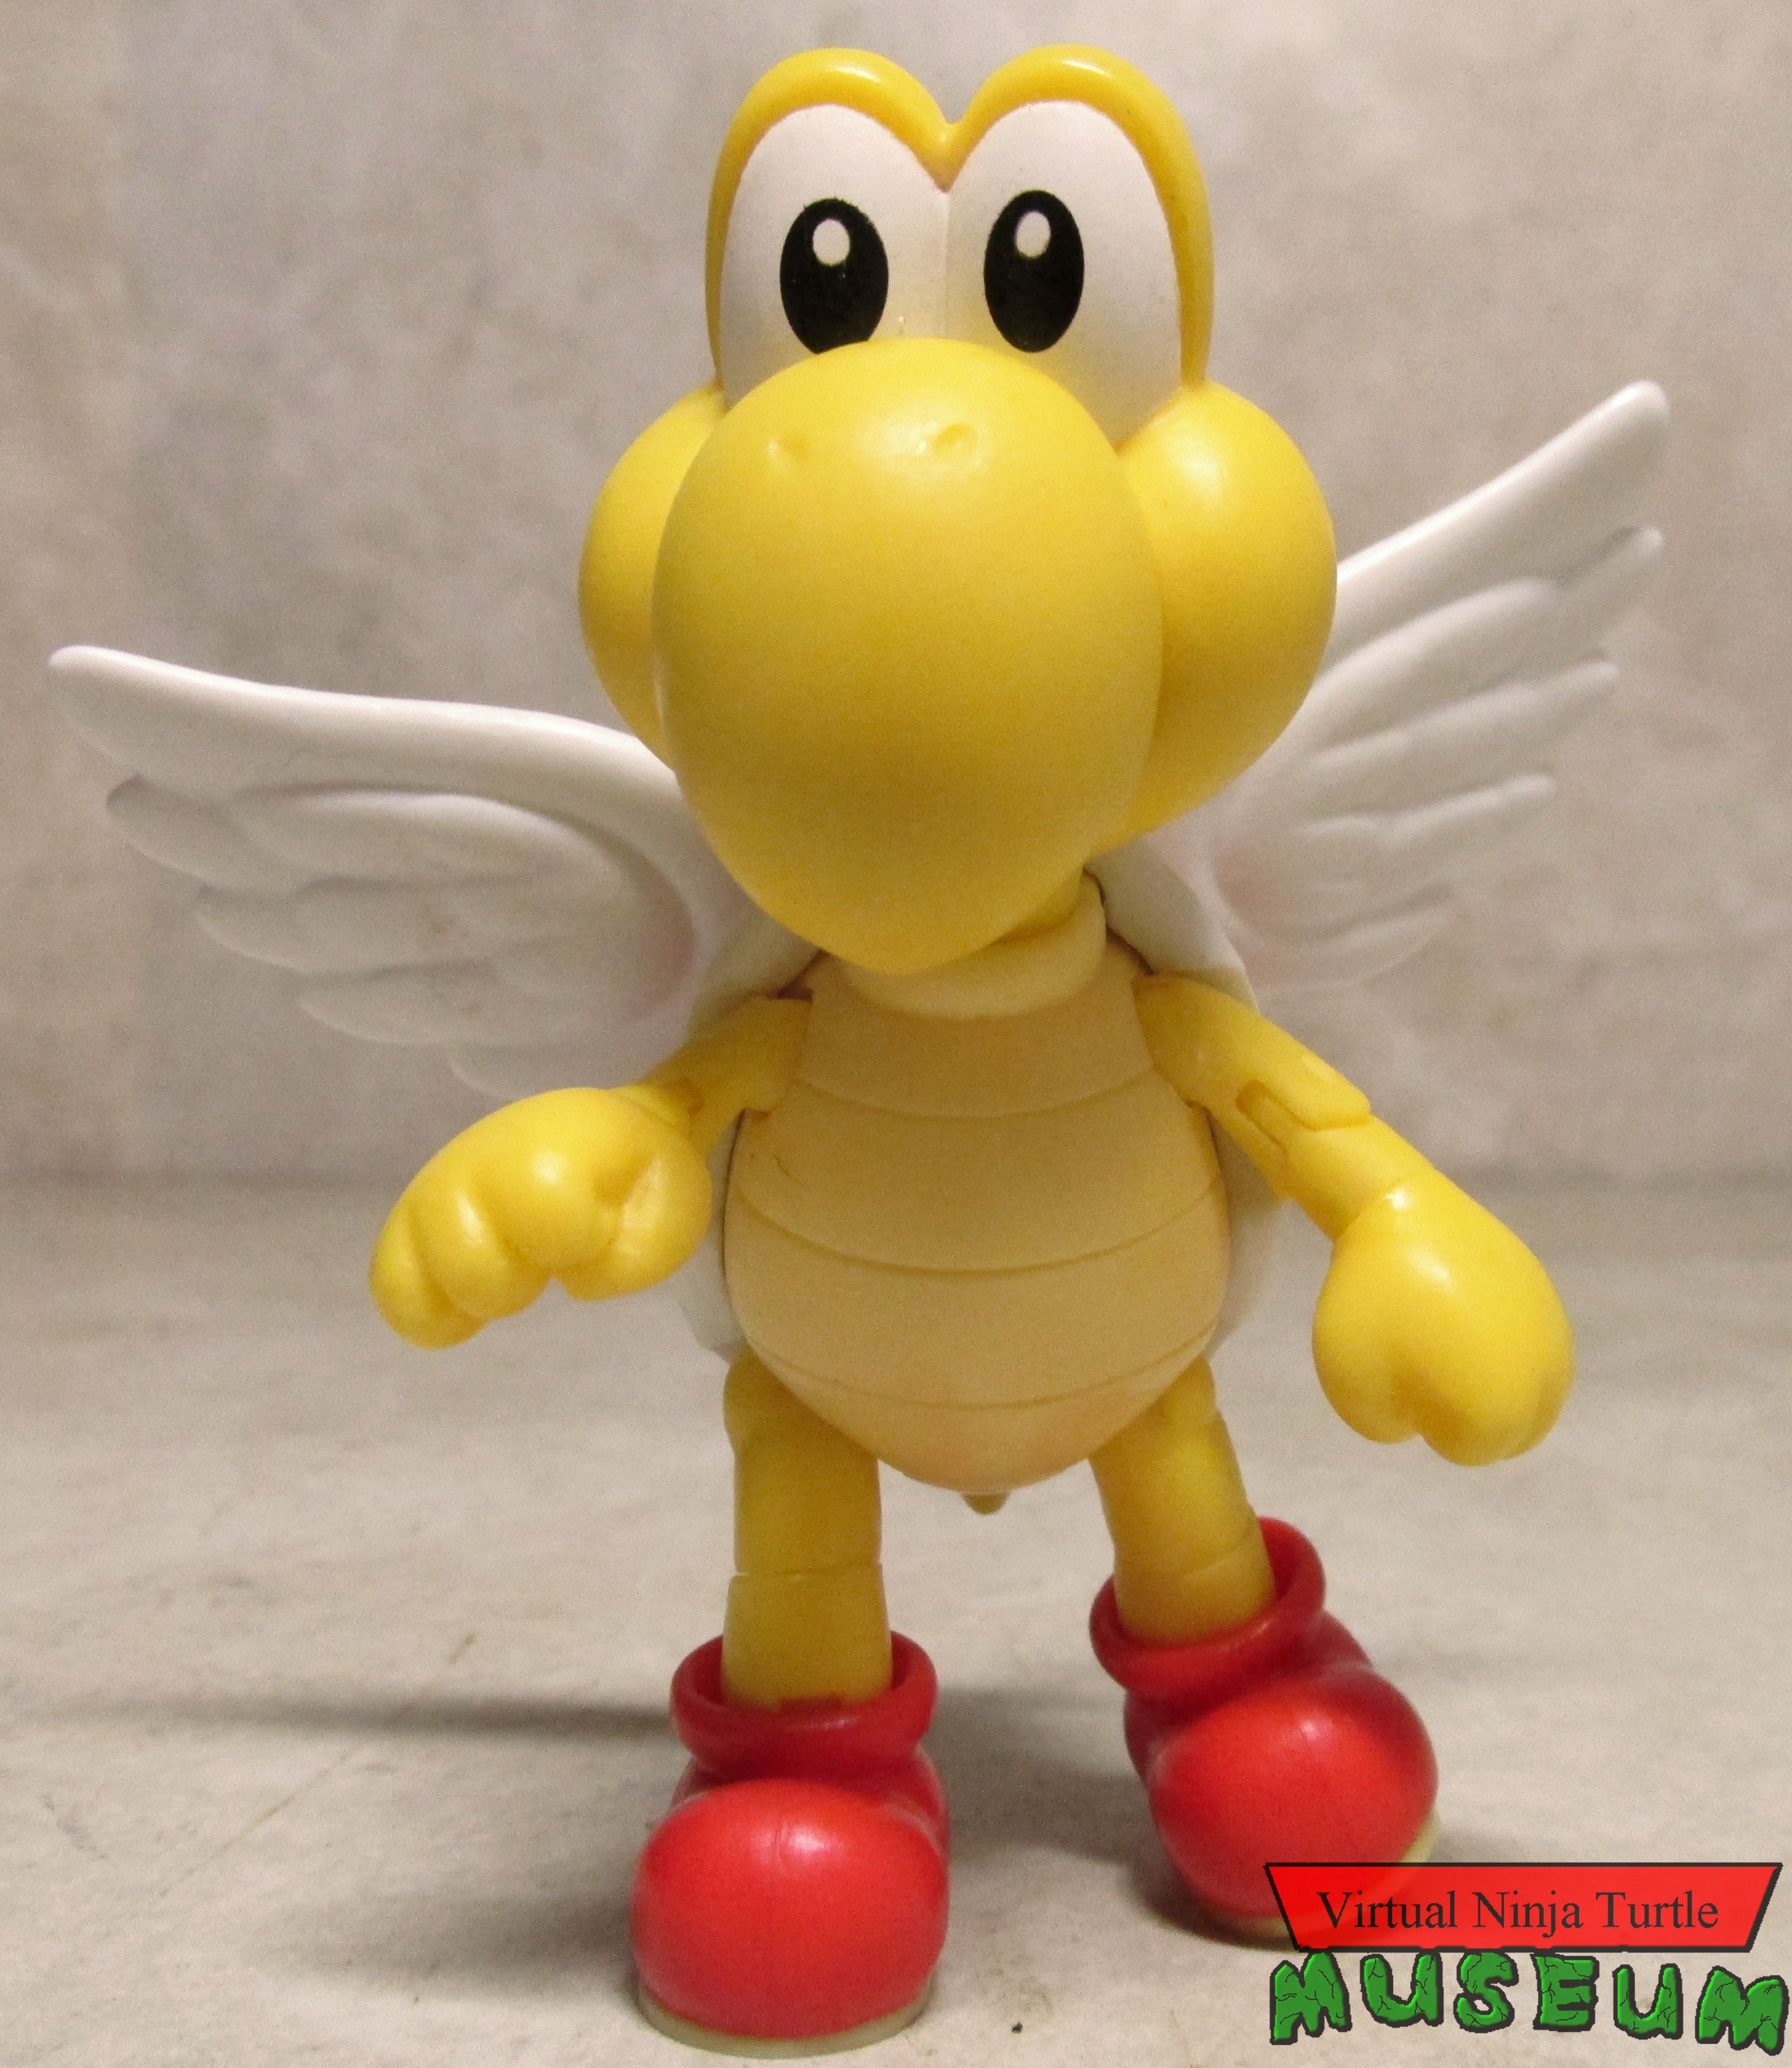 Koopa Paratrooper with wings front view